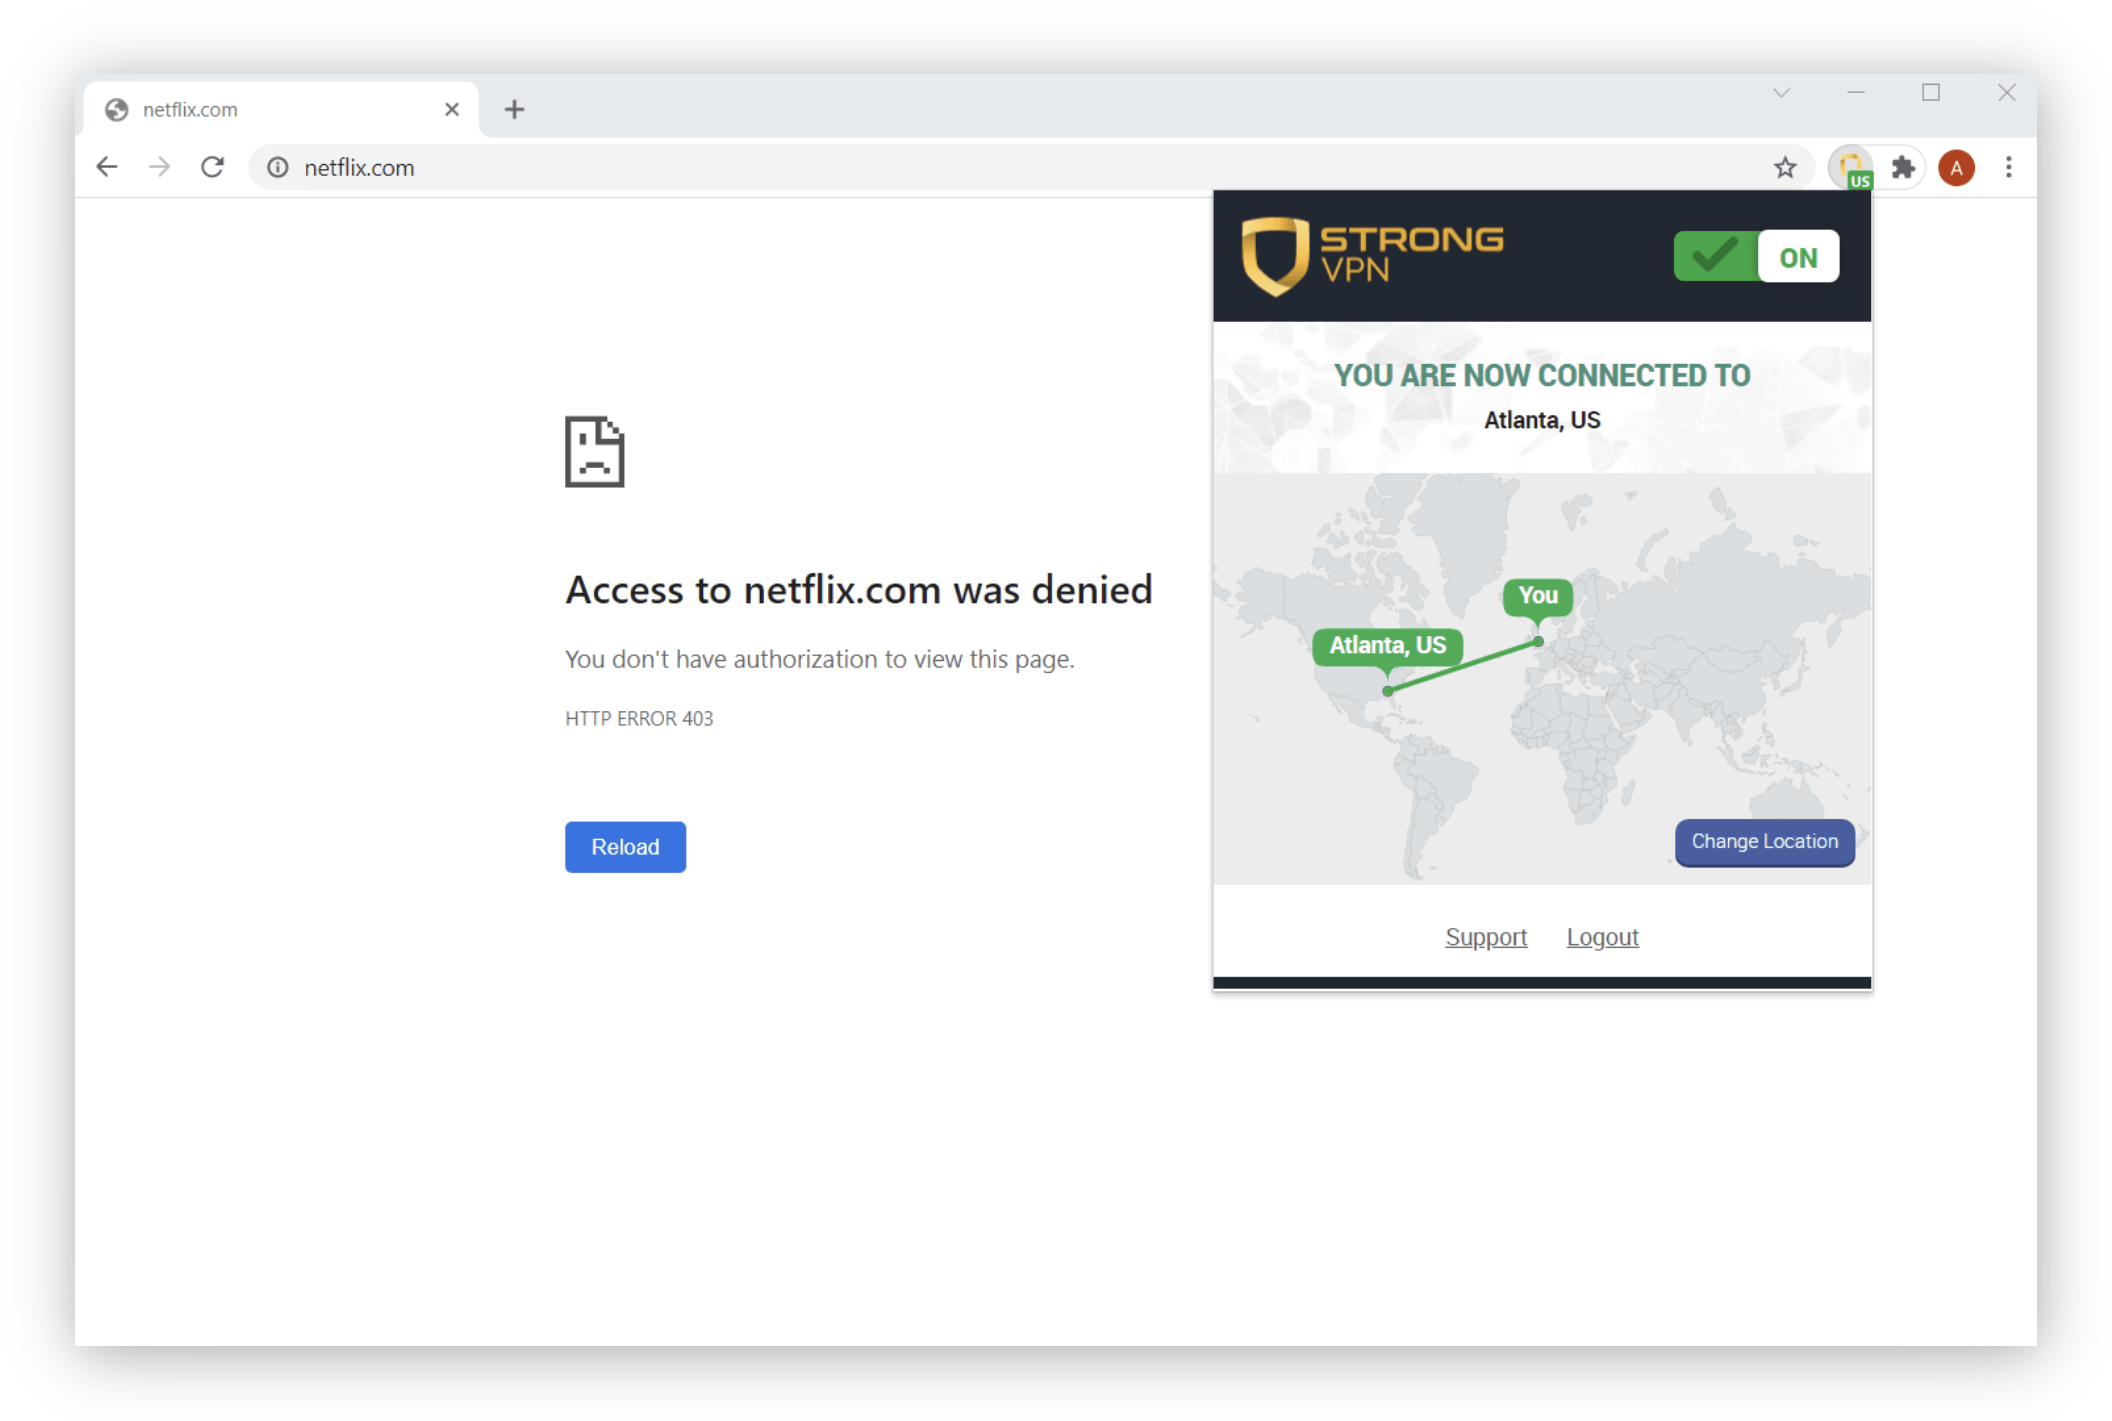 Screenshot of the Chrome browser. StrongVPN's proxy browser extension is enabled and connected from the UK to Atlanta, US. The browser shows "Access to netflix.com was denied."